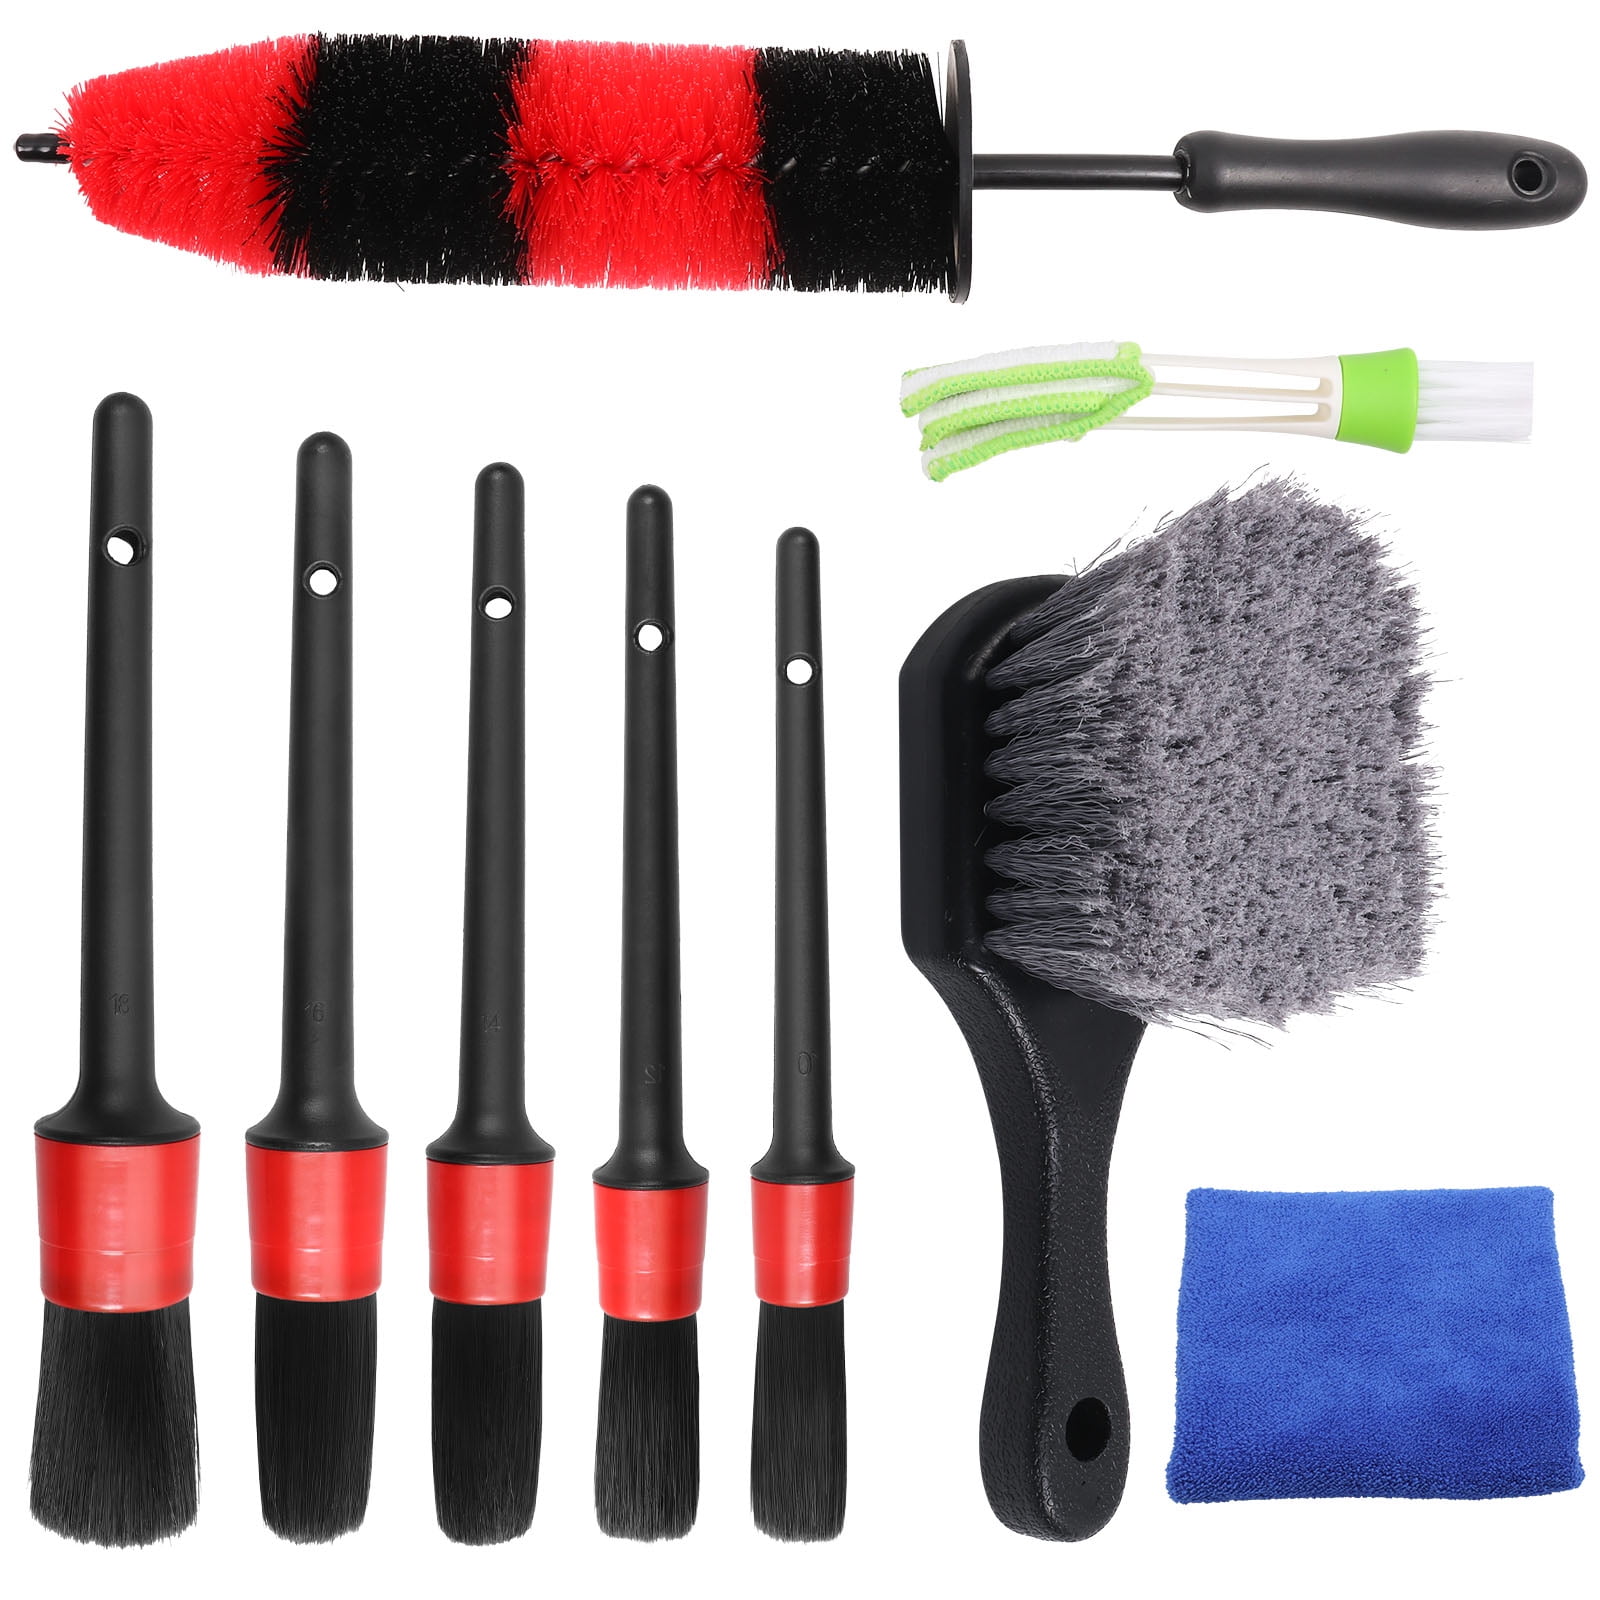 Details about   For Shop Vac HouseHold Cleaning Tool Kit Vacuum Attachment Dusty Brush set 